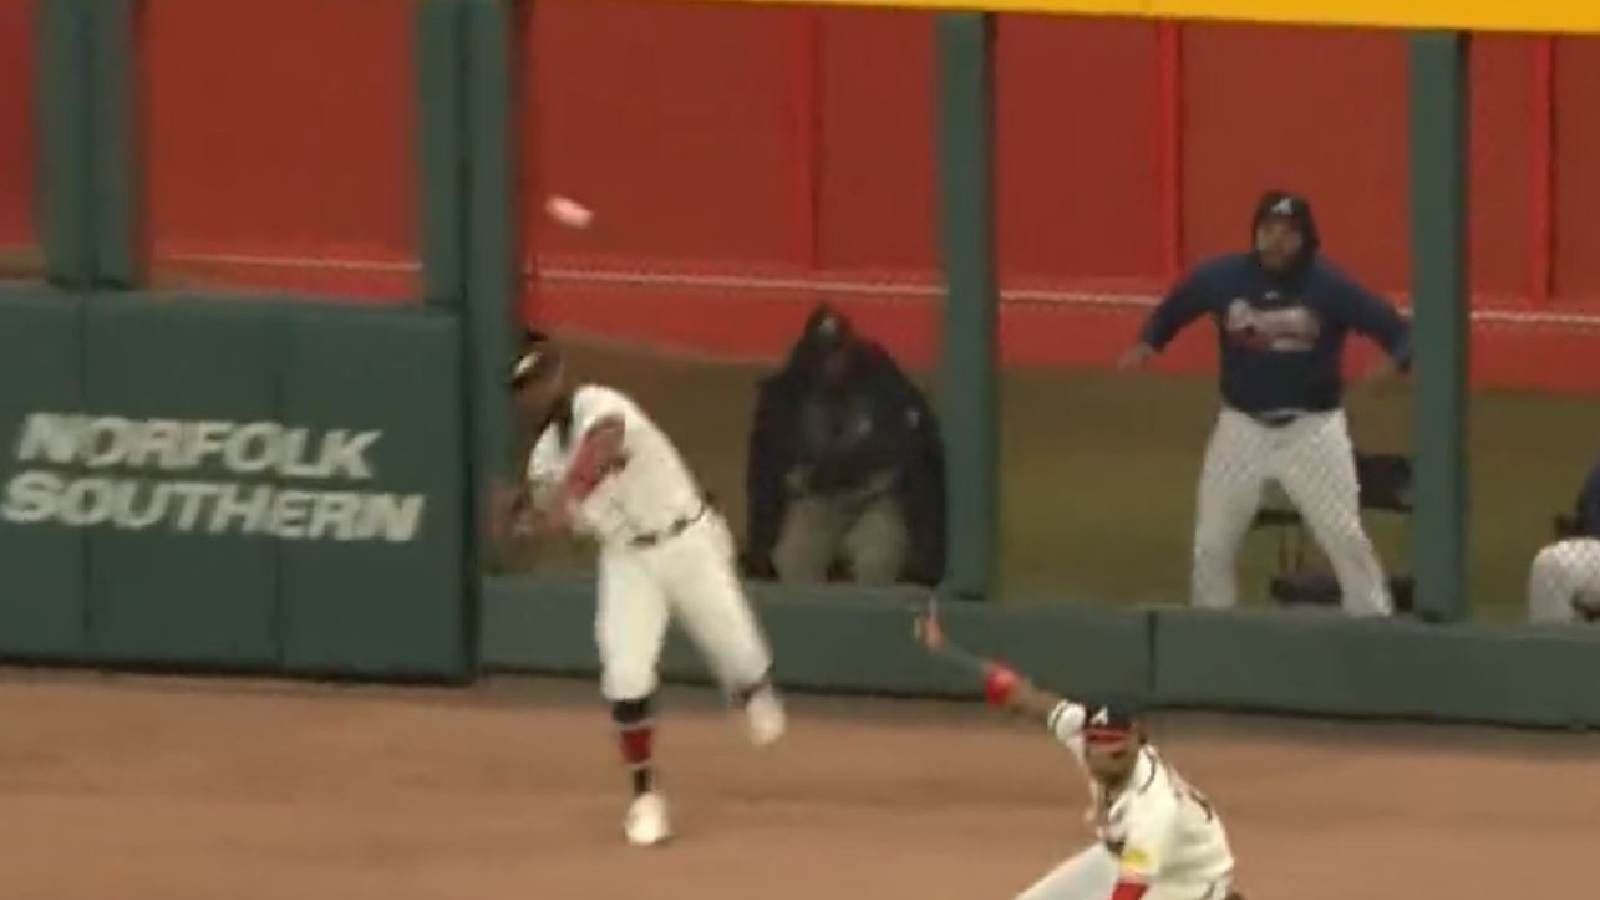 Braves' game-winning double play vs. Phillies gets awesome radio call